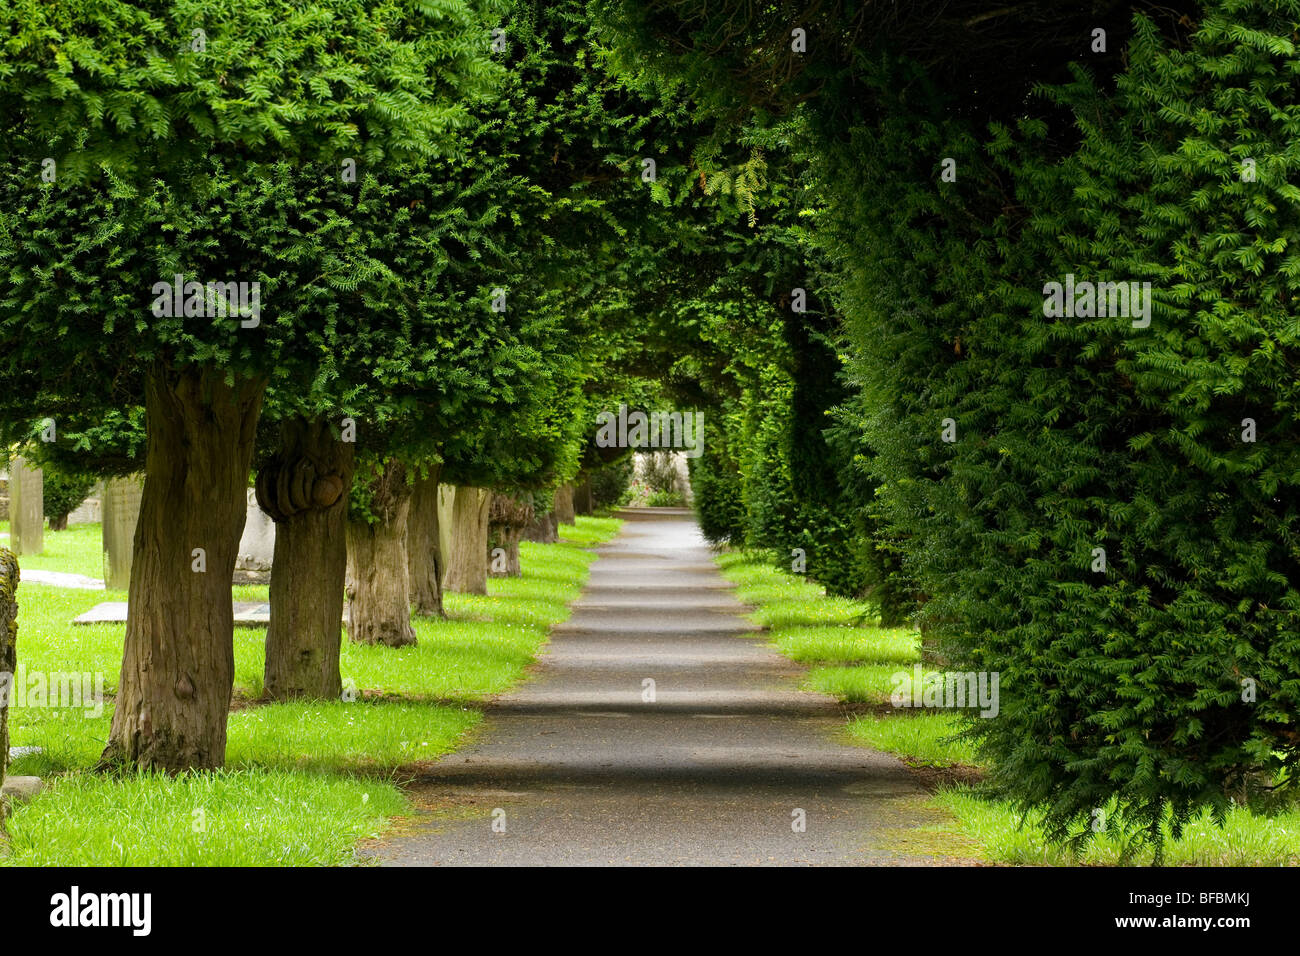 Avenue of yew trees in the churchyard of Painswick England Stock Photo